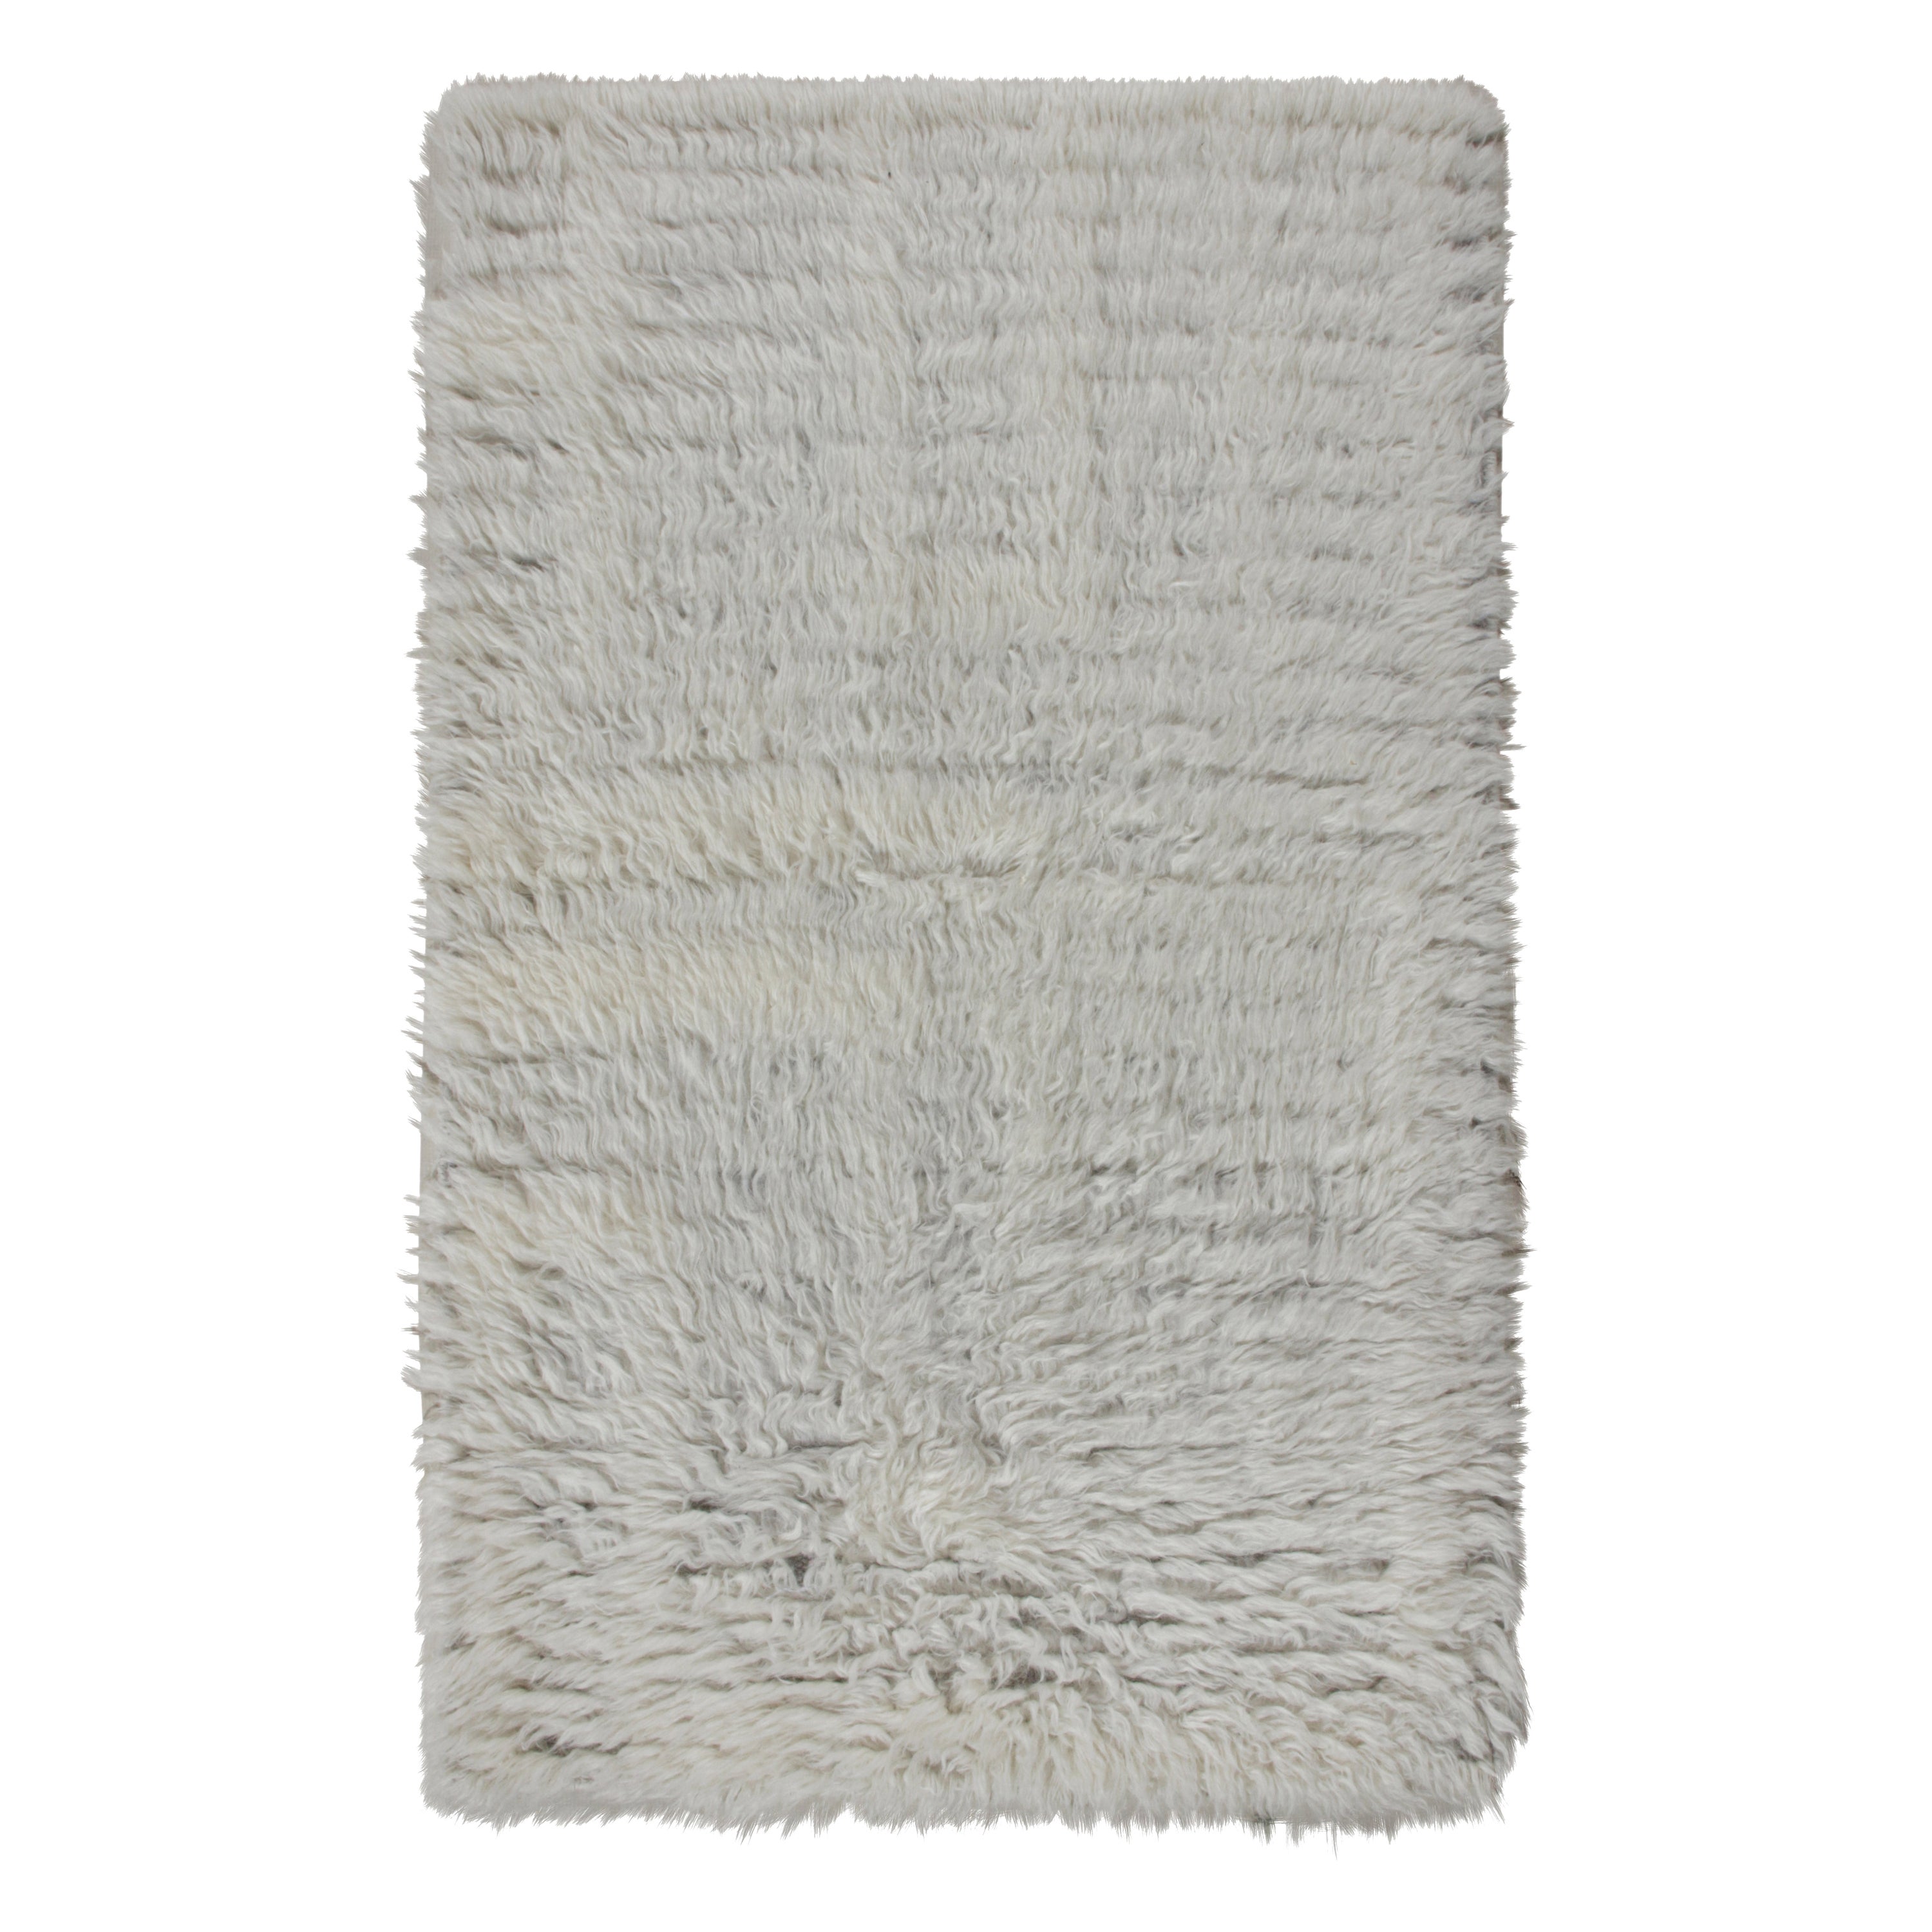 Rug & Kilim’s Moroccan Style Shag Rug in Solid Gray-White, High Pile For Sale